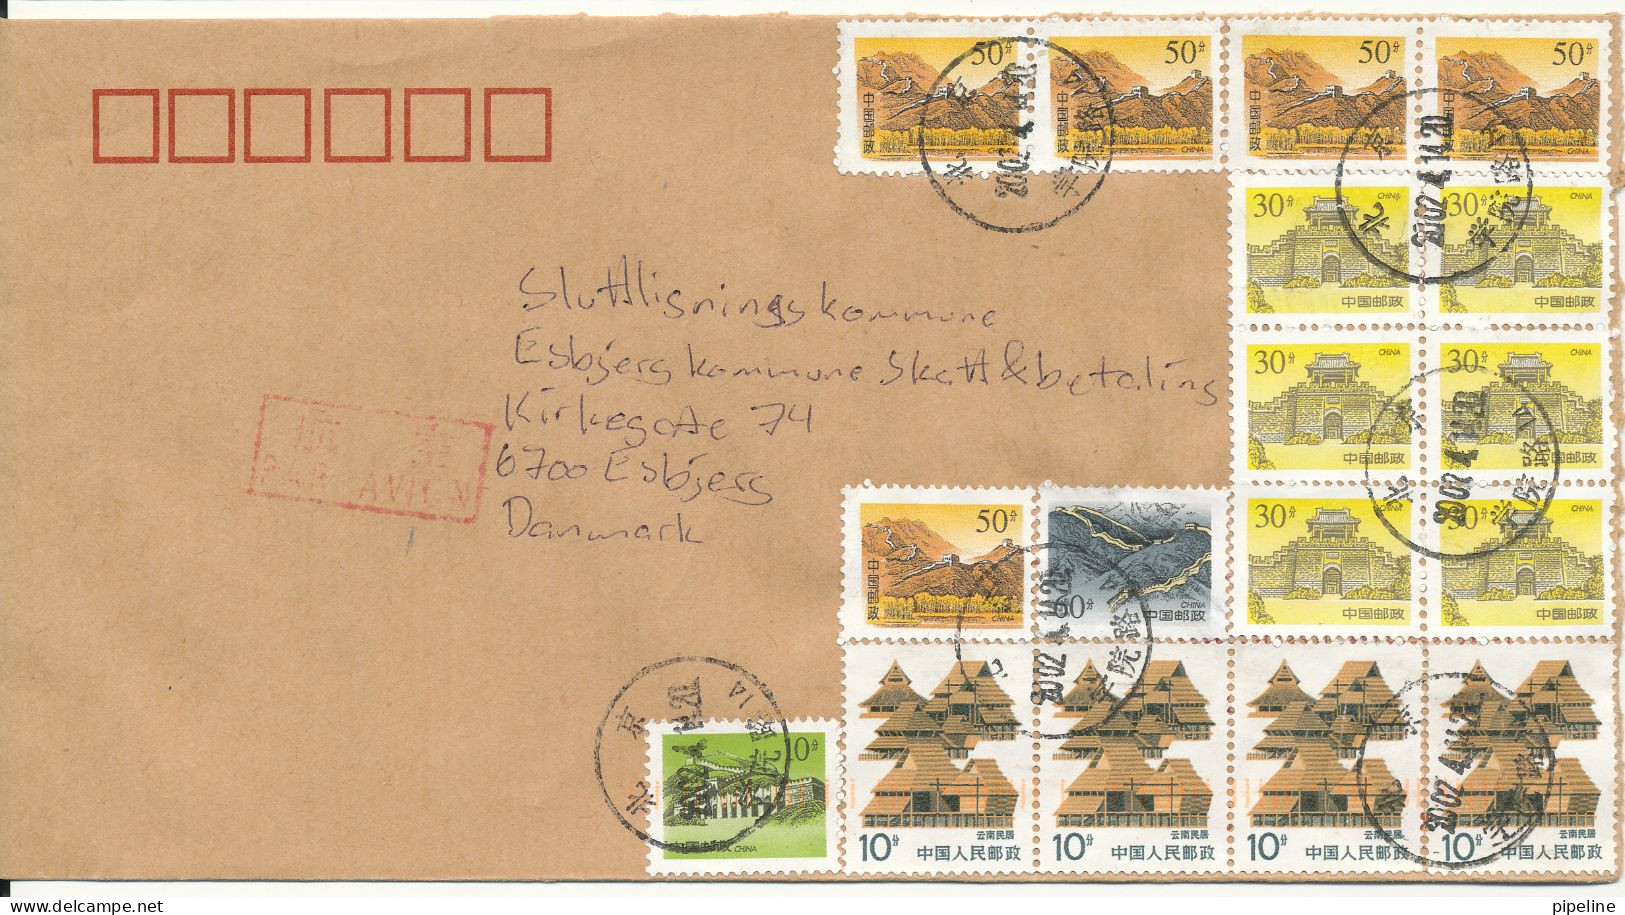 China Cover Sent To Denmark 2002 With A Lot Of Stamps - Briefe U. Dokumente